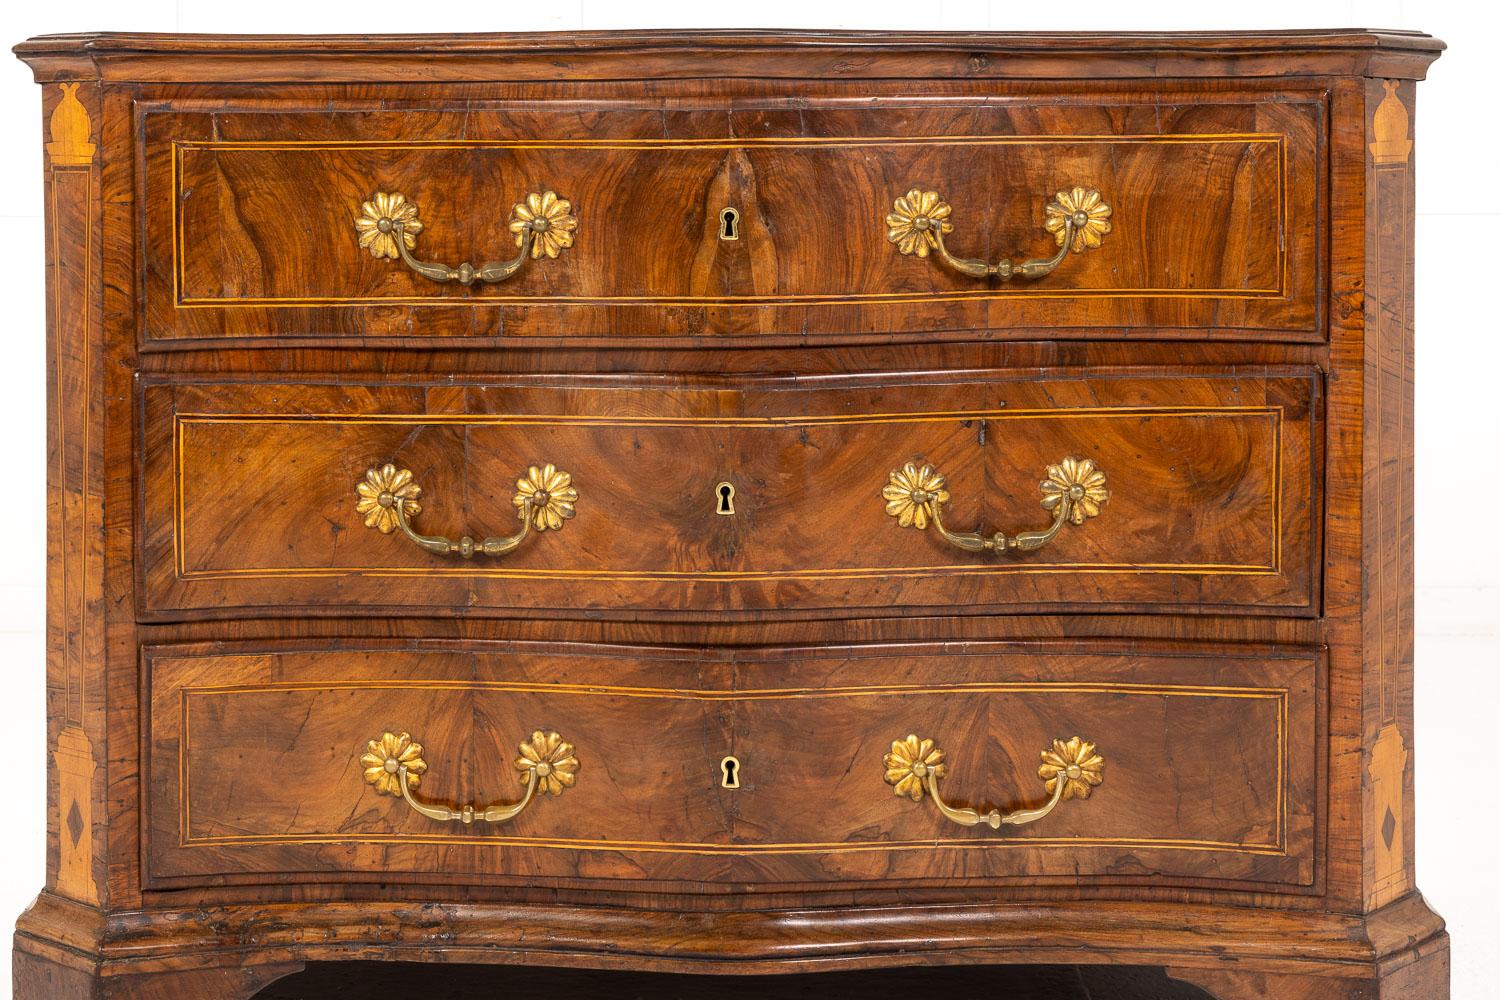 18th Century Italian serpentine commode constructed in walnut. Having a quarter veneered moulded and cross banded top with fine stringing/inlay conforming to the shape below. Three generous sized, deep drawers, with large drop brass handles are